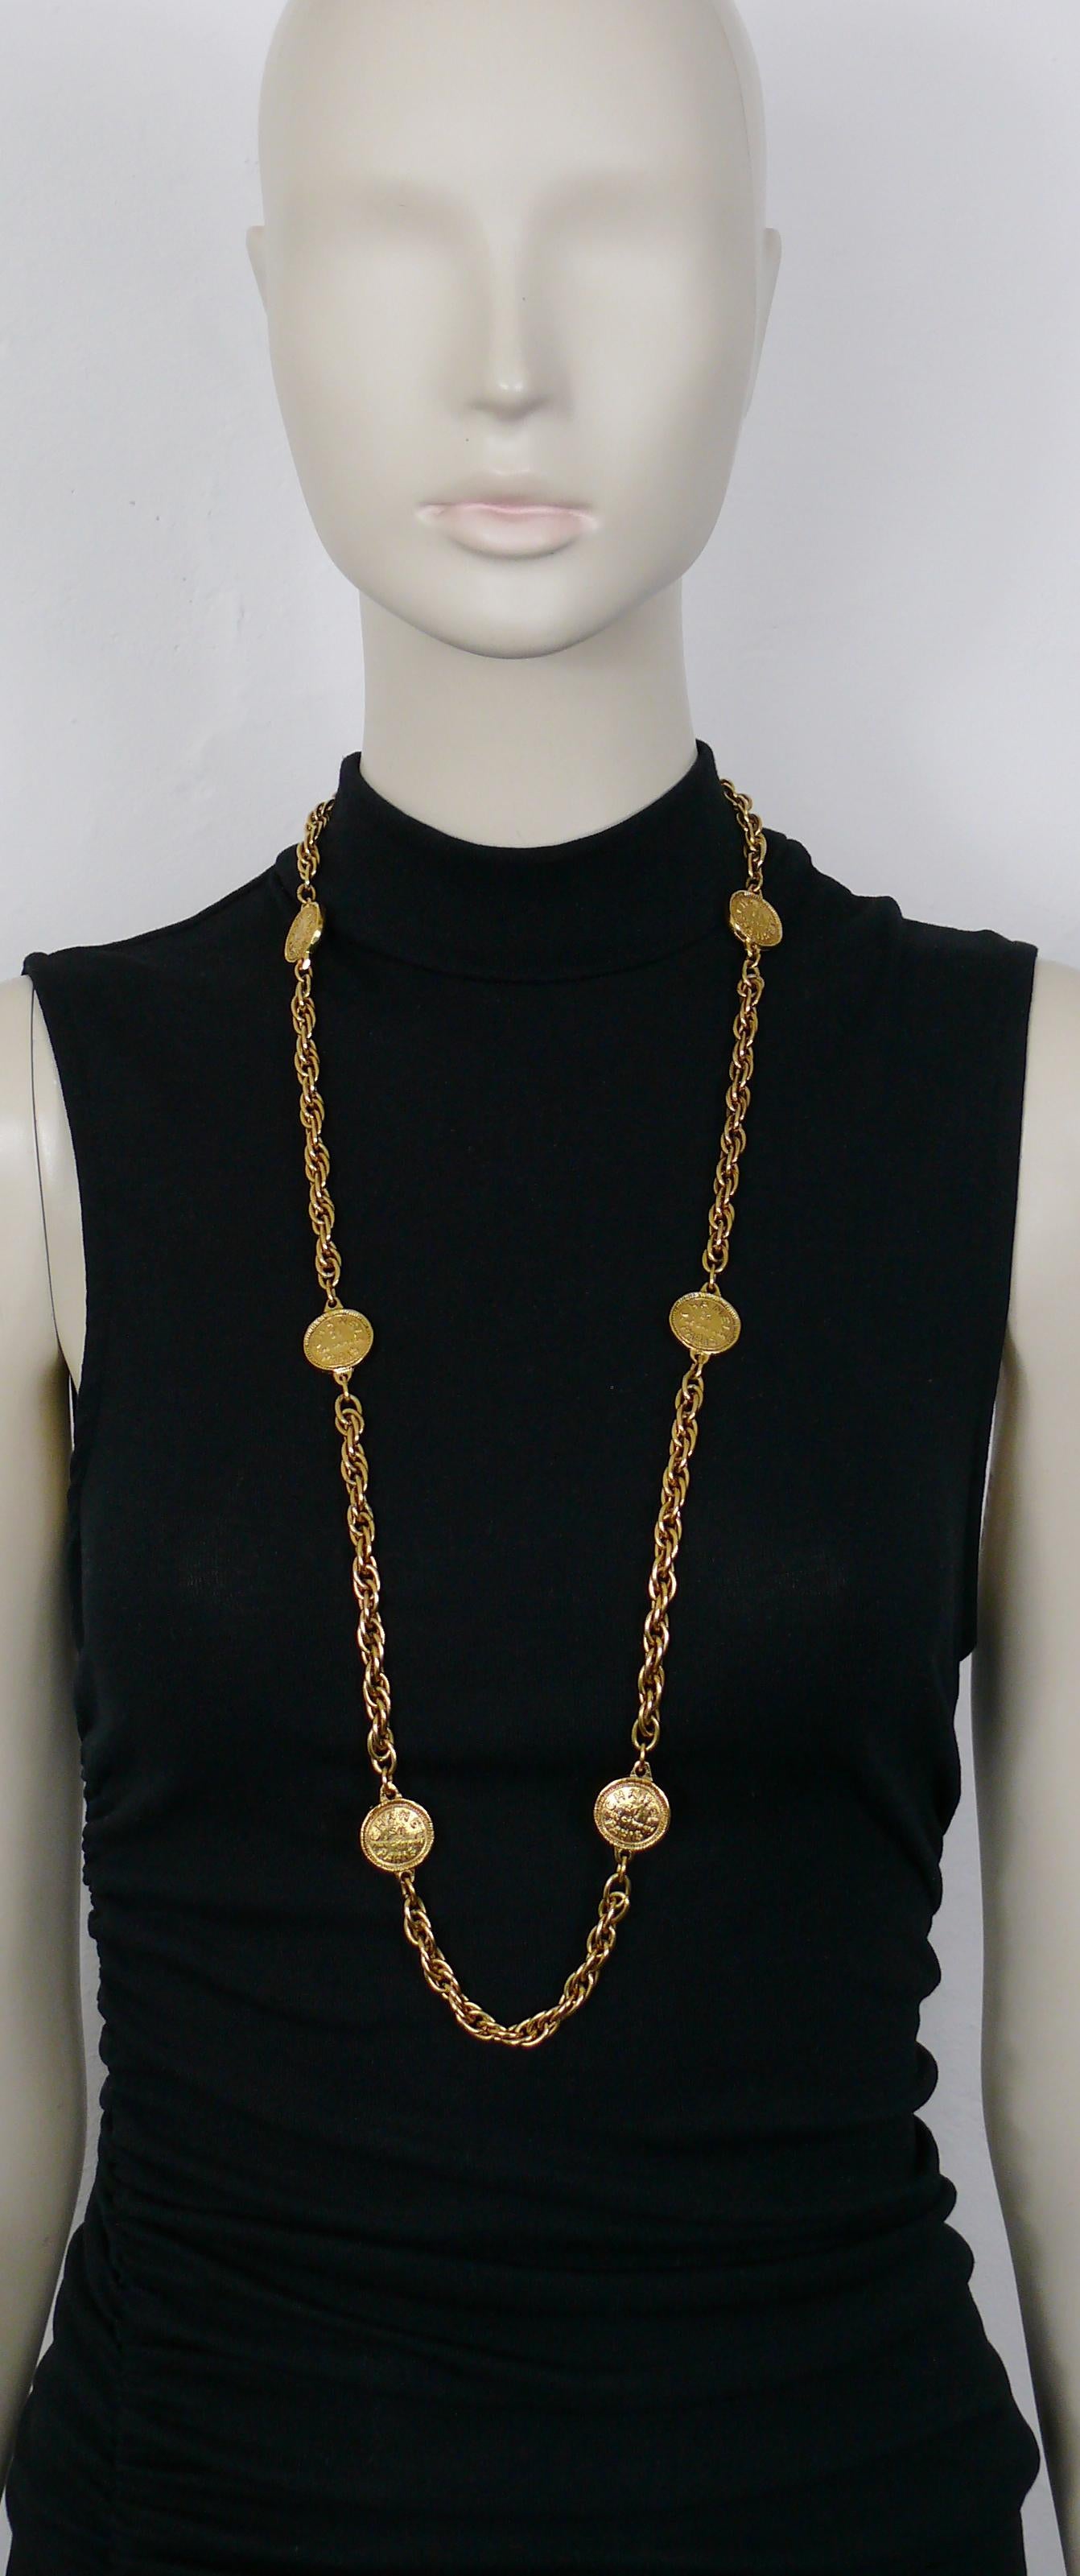 CHANEL vintage gold toned chain necklace featuring 6 medallions embossed CHANEL 31 RUE CAMBON PARIS.

Spring clasp closure.

Embossed Marked CHANEL Made in France.

Indicative measurements : chain length approx. 92 cm (36.22 inches) /  medallions